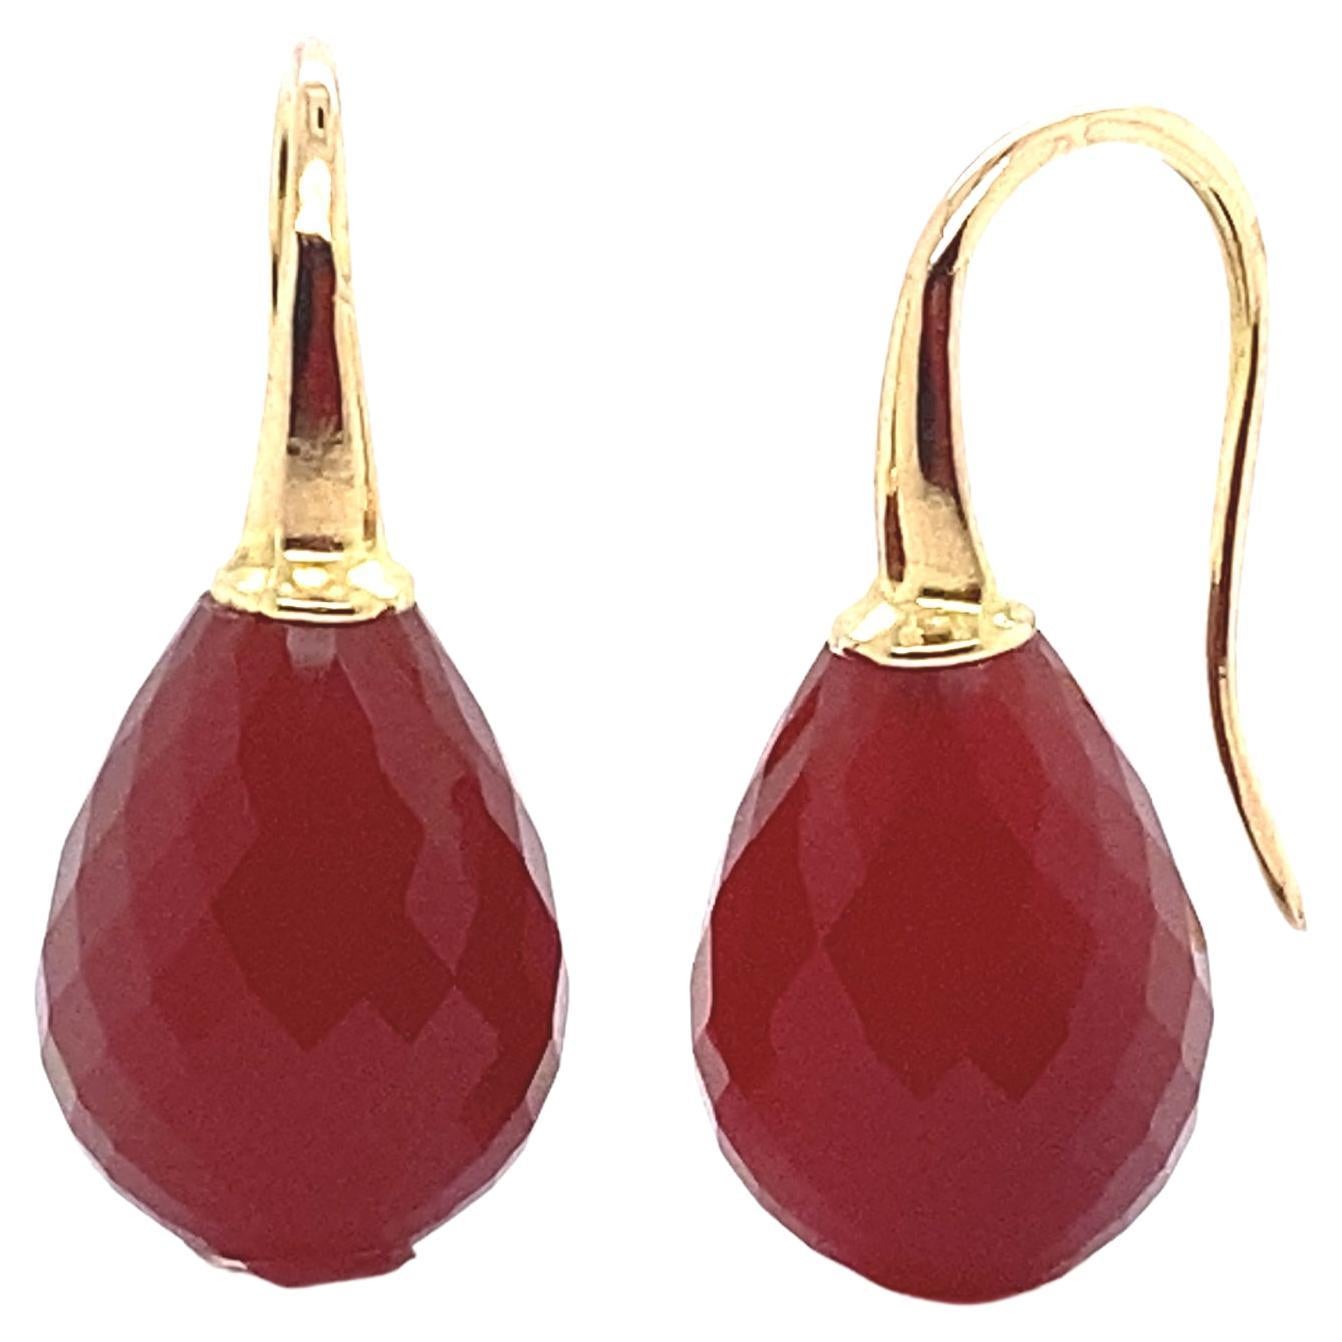 18 Carat Gold Earring with a Red Agate Briolette Cut